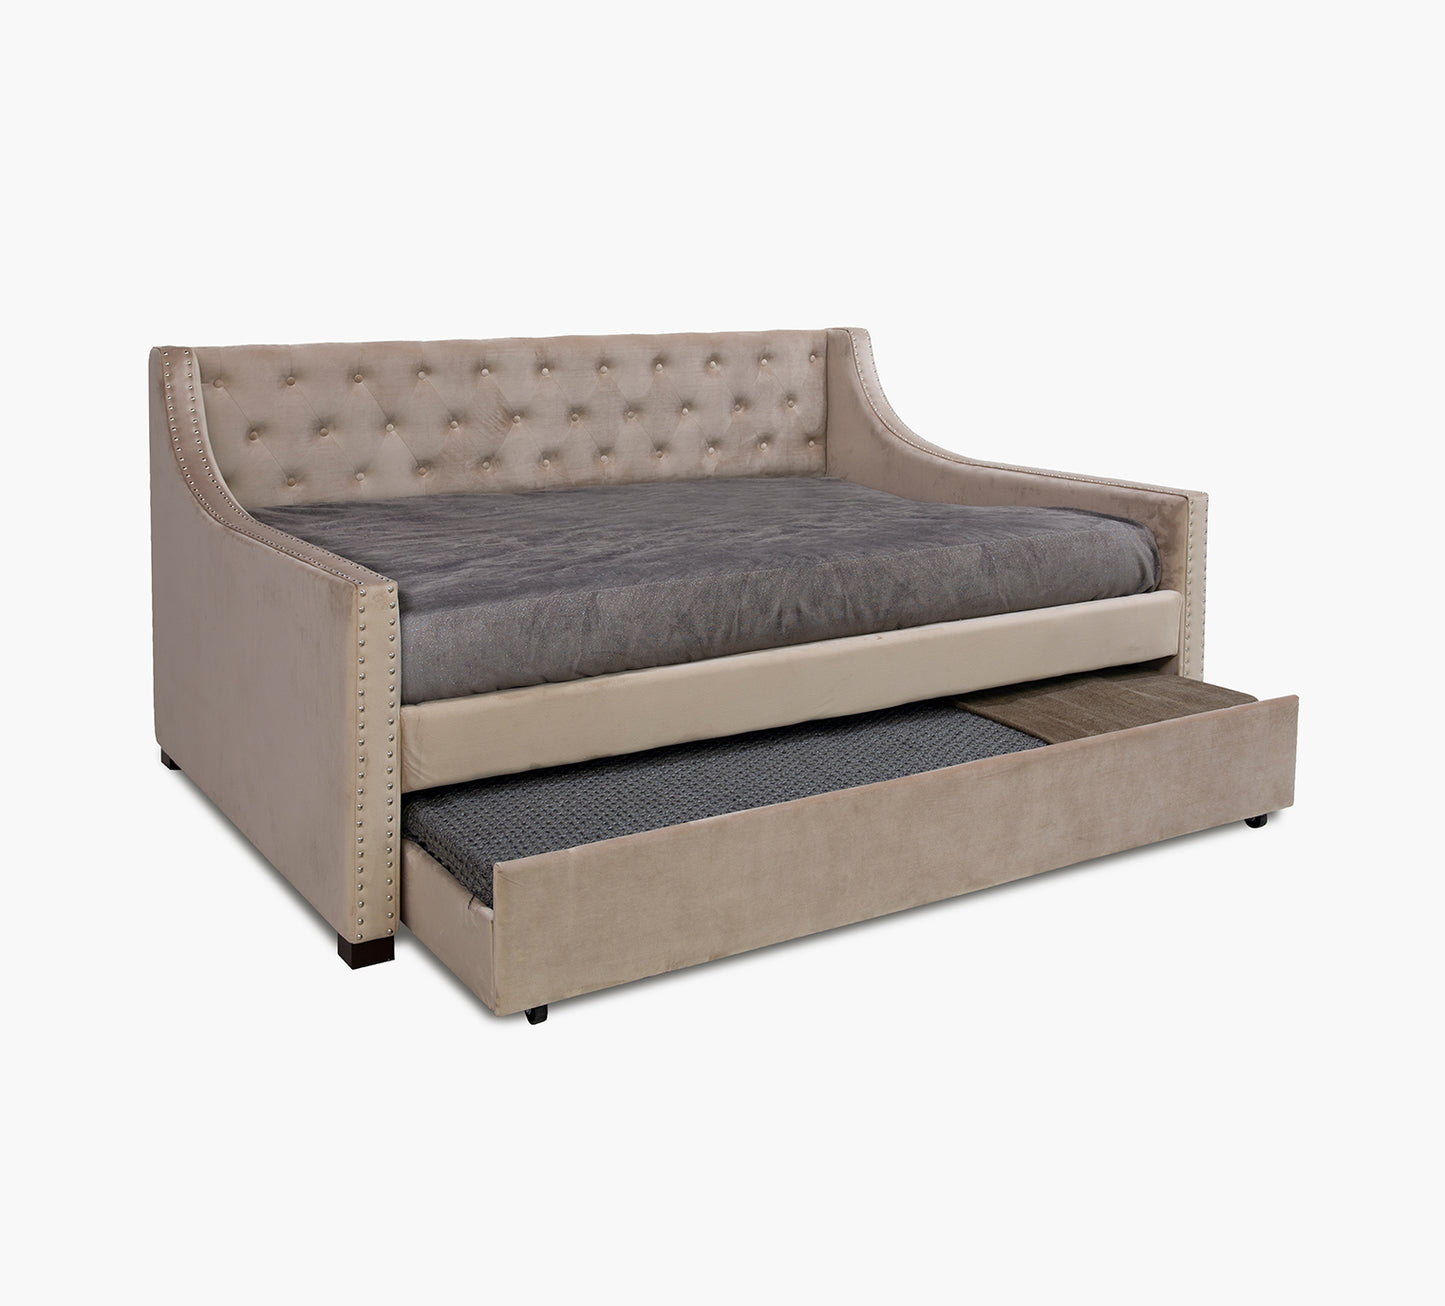 Gulf Breeze Champagne Full Upholstered Daybed